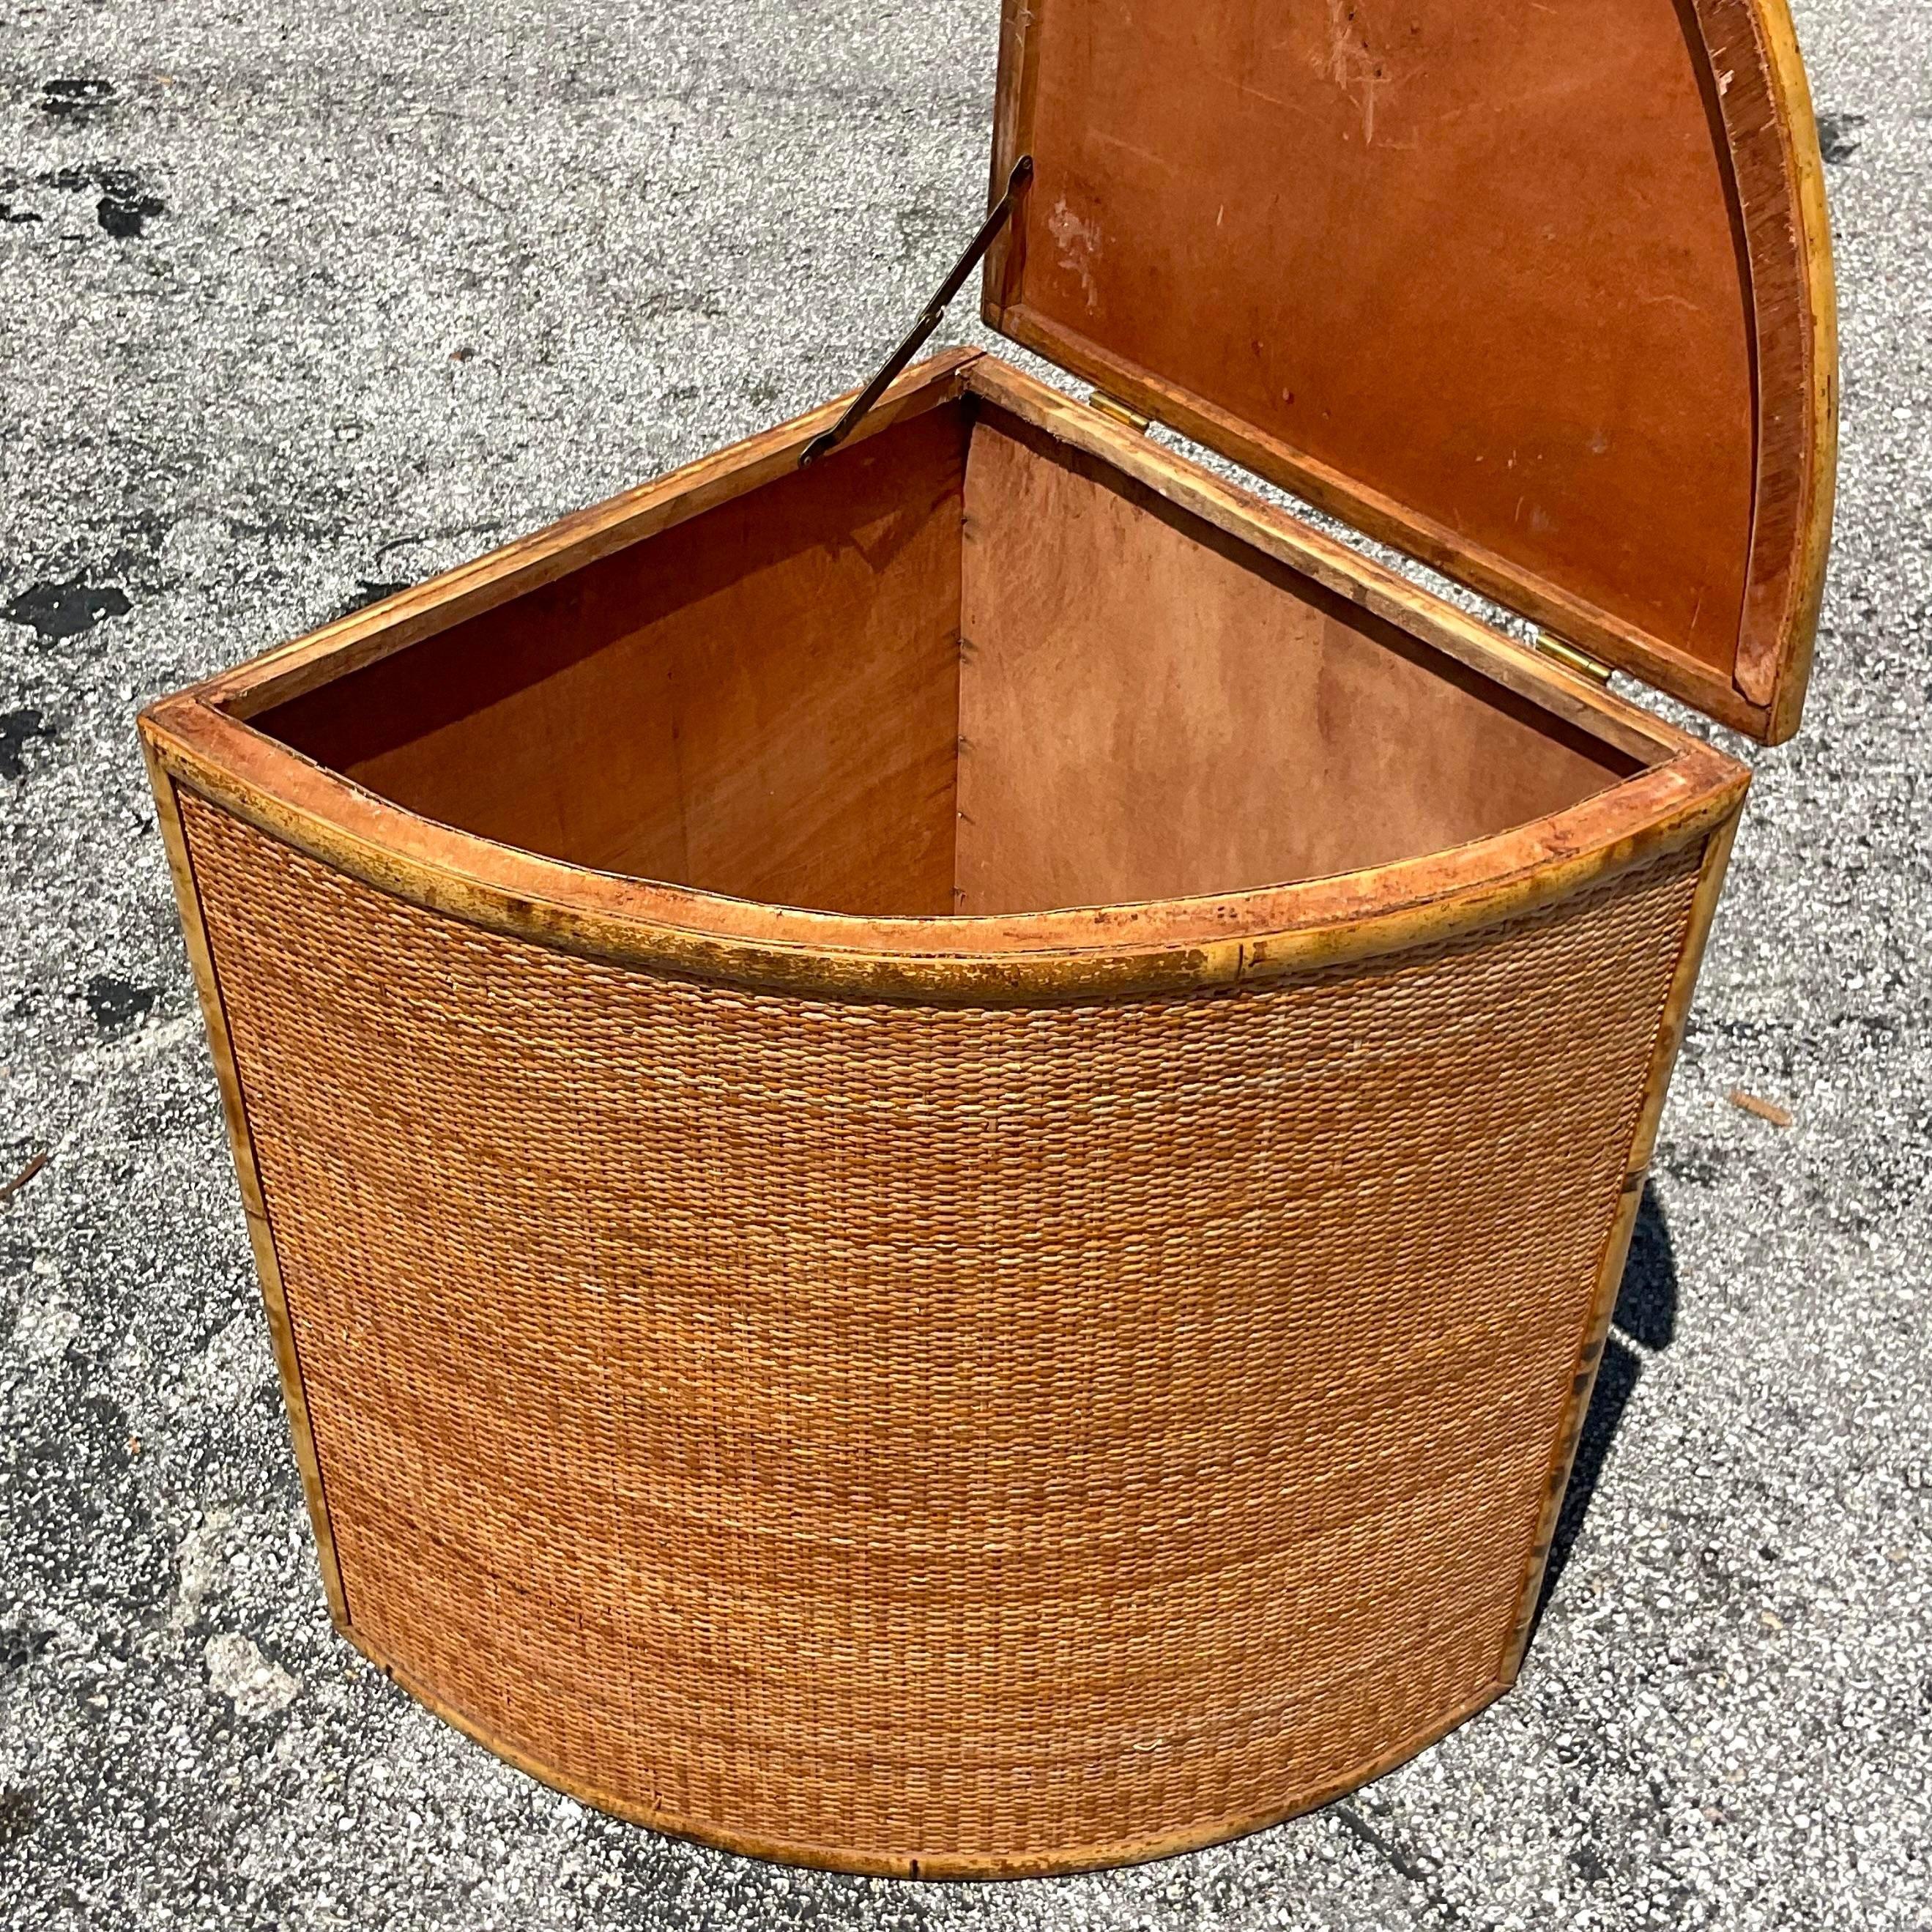 Embrace coastal charm with this Vintage Coastal Woven Rattan Corner Cabinet. Inspired by the relaxed elegance of American seaside living, its woven rattan design brings a touch of natural beauty and practical storage solutions to any room,